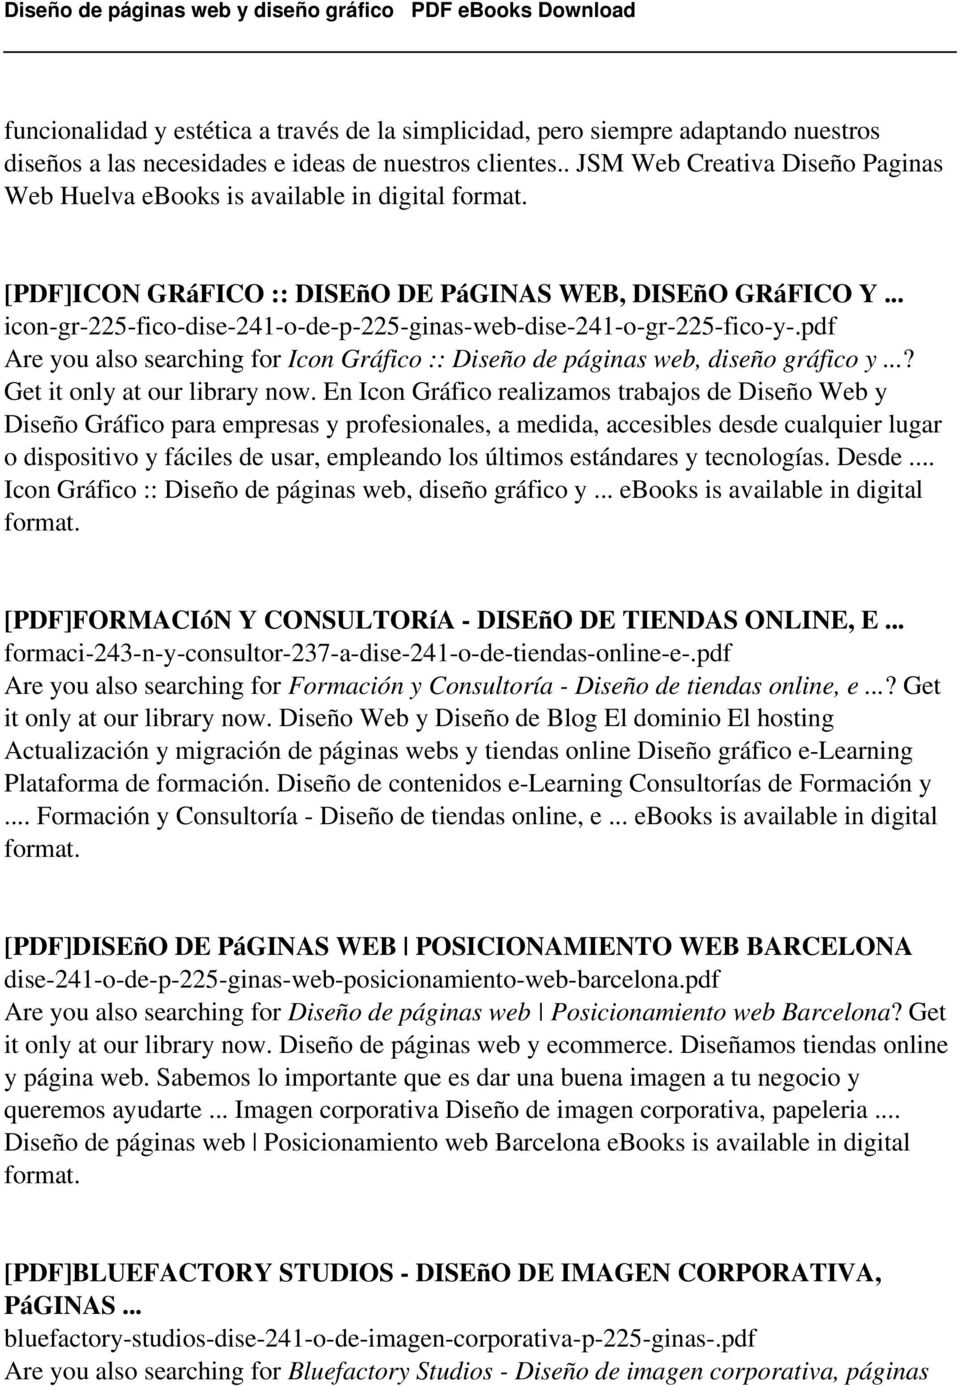 .. icon-gr-225-fico-dise-241-o-de-p-225-ginas-web-dise-241-o-gr-225-fico-y-.pdf Are you also searching for Icon Gráfico :: Diseño de páginas web, diseño gráfico y...? Get it only at our library now.